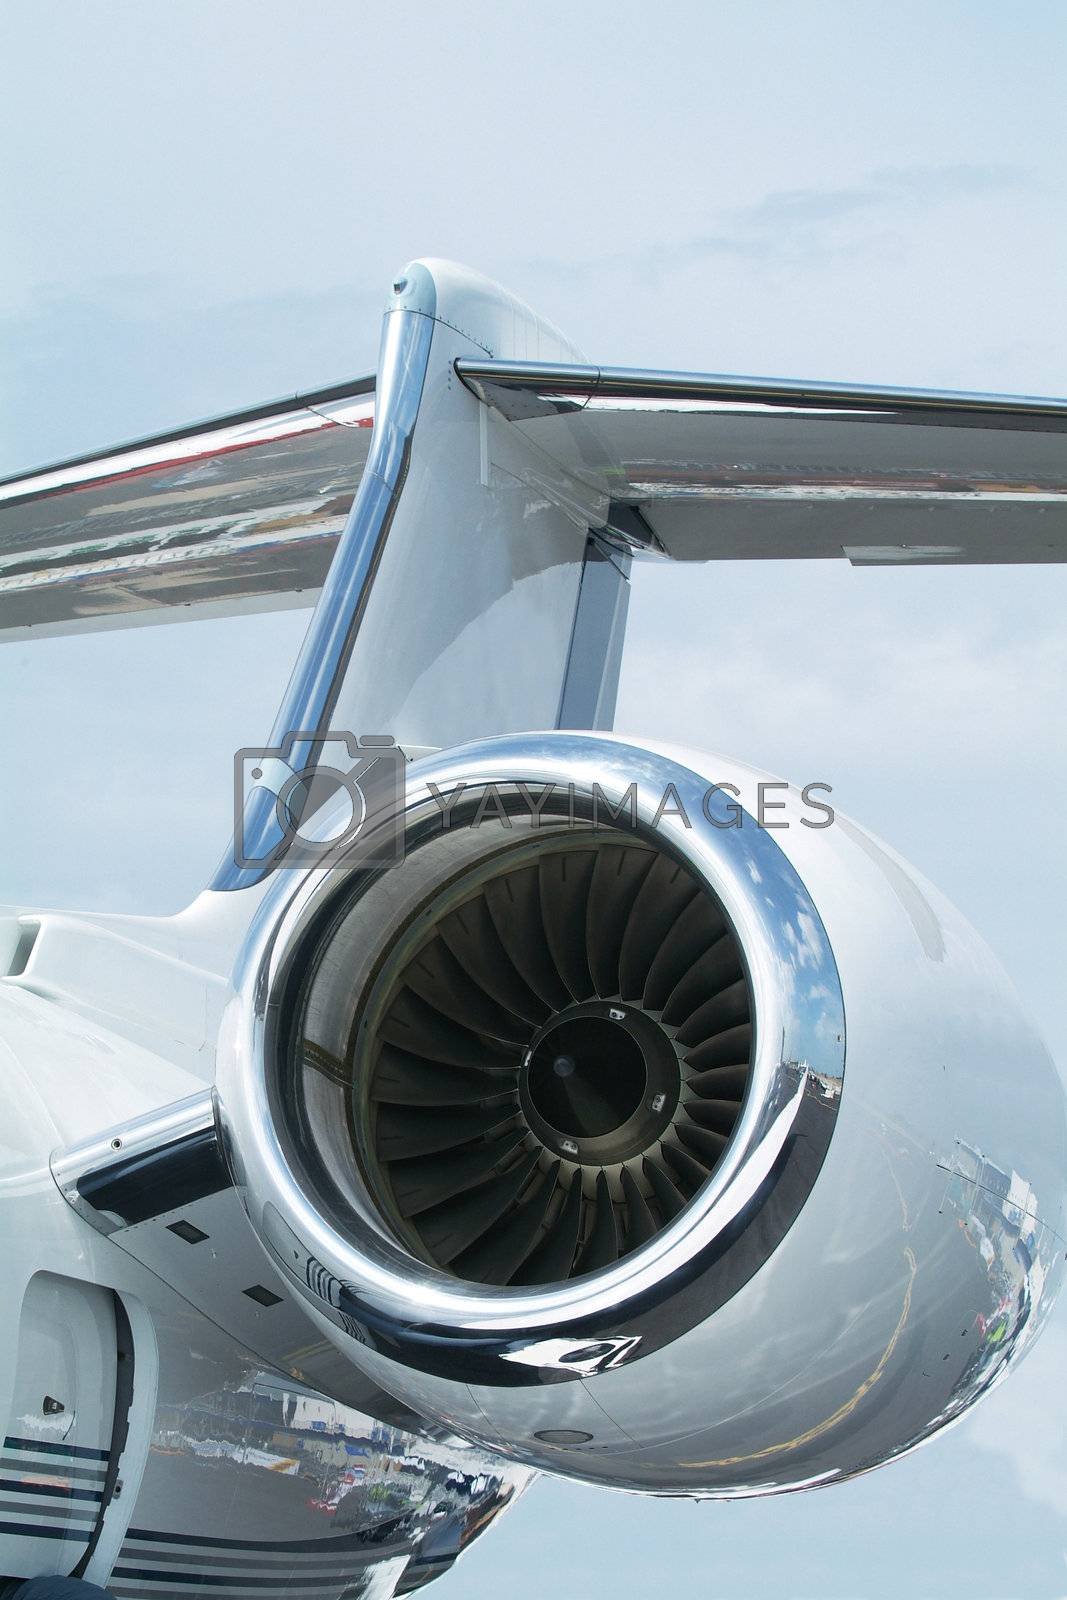 Royalty free image of Rear of business-jet by epixx